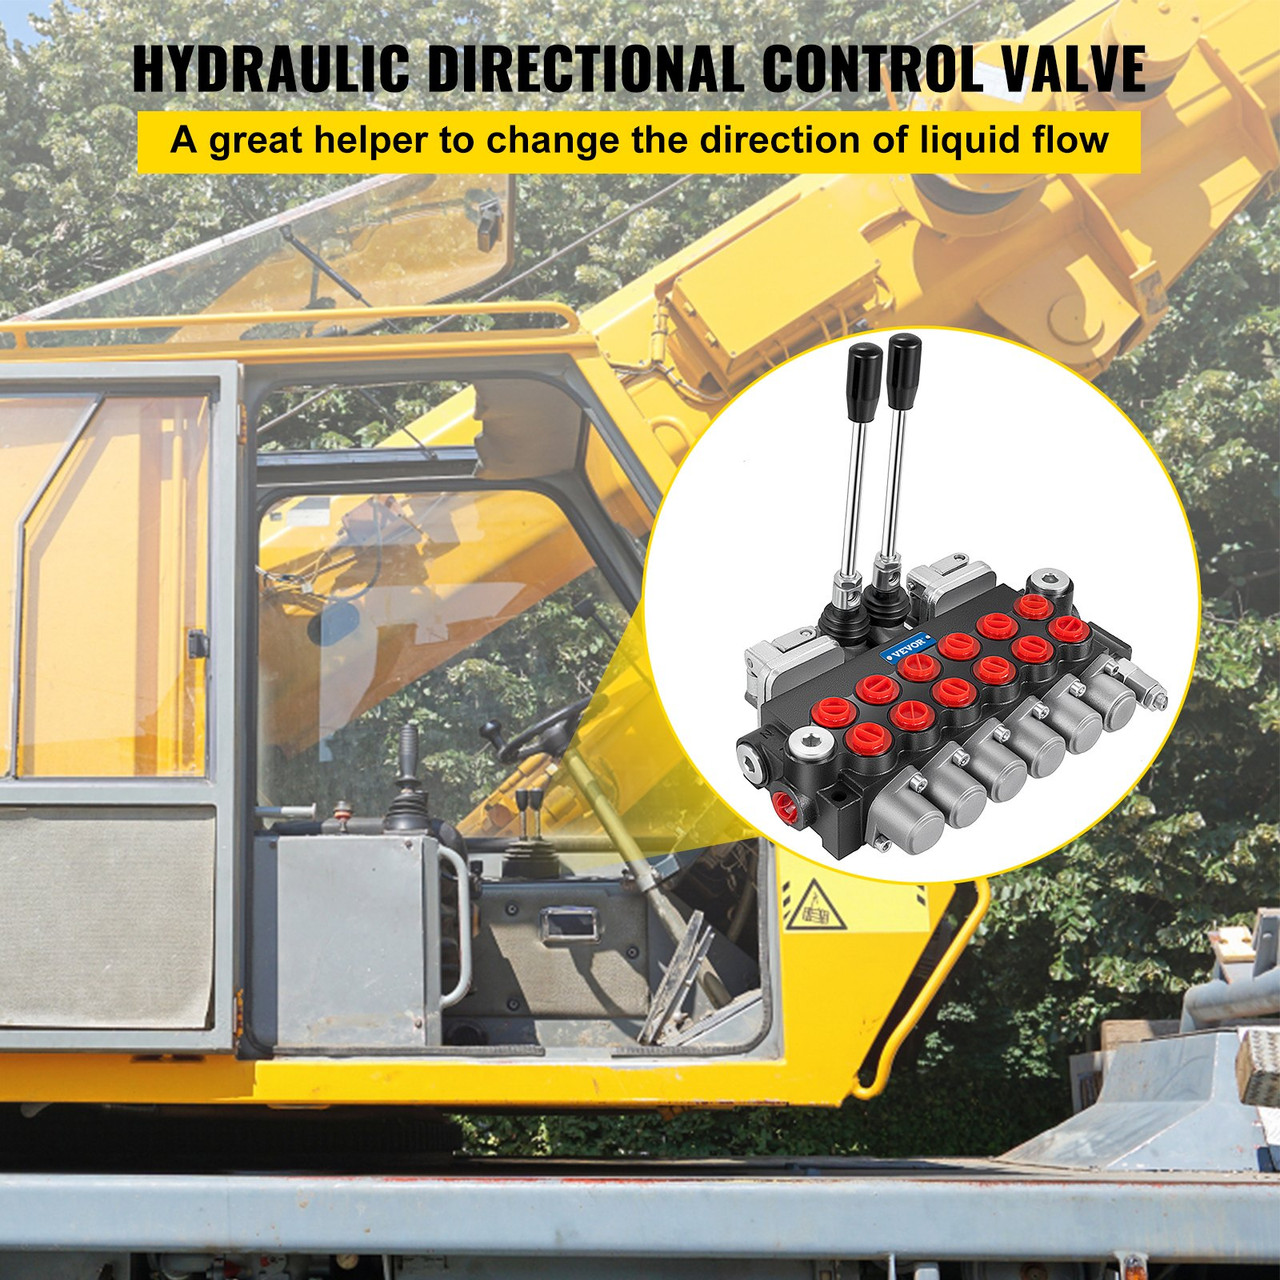 Hydraulic Directional Control Valve, 6 Spool Hydraulic Spool Valve, 11 GPM Hydraulic Loader Valve, 4500 PSI Directional Control Valve, Hydraulic Valves and Controls for Tractors Loaders Tanks